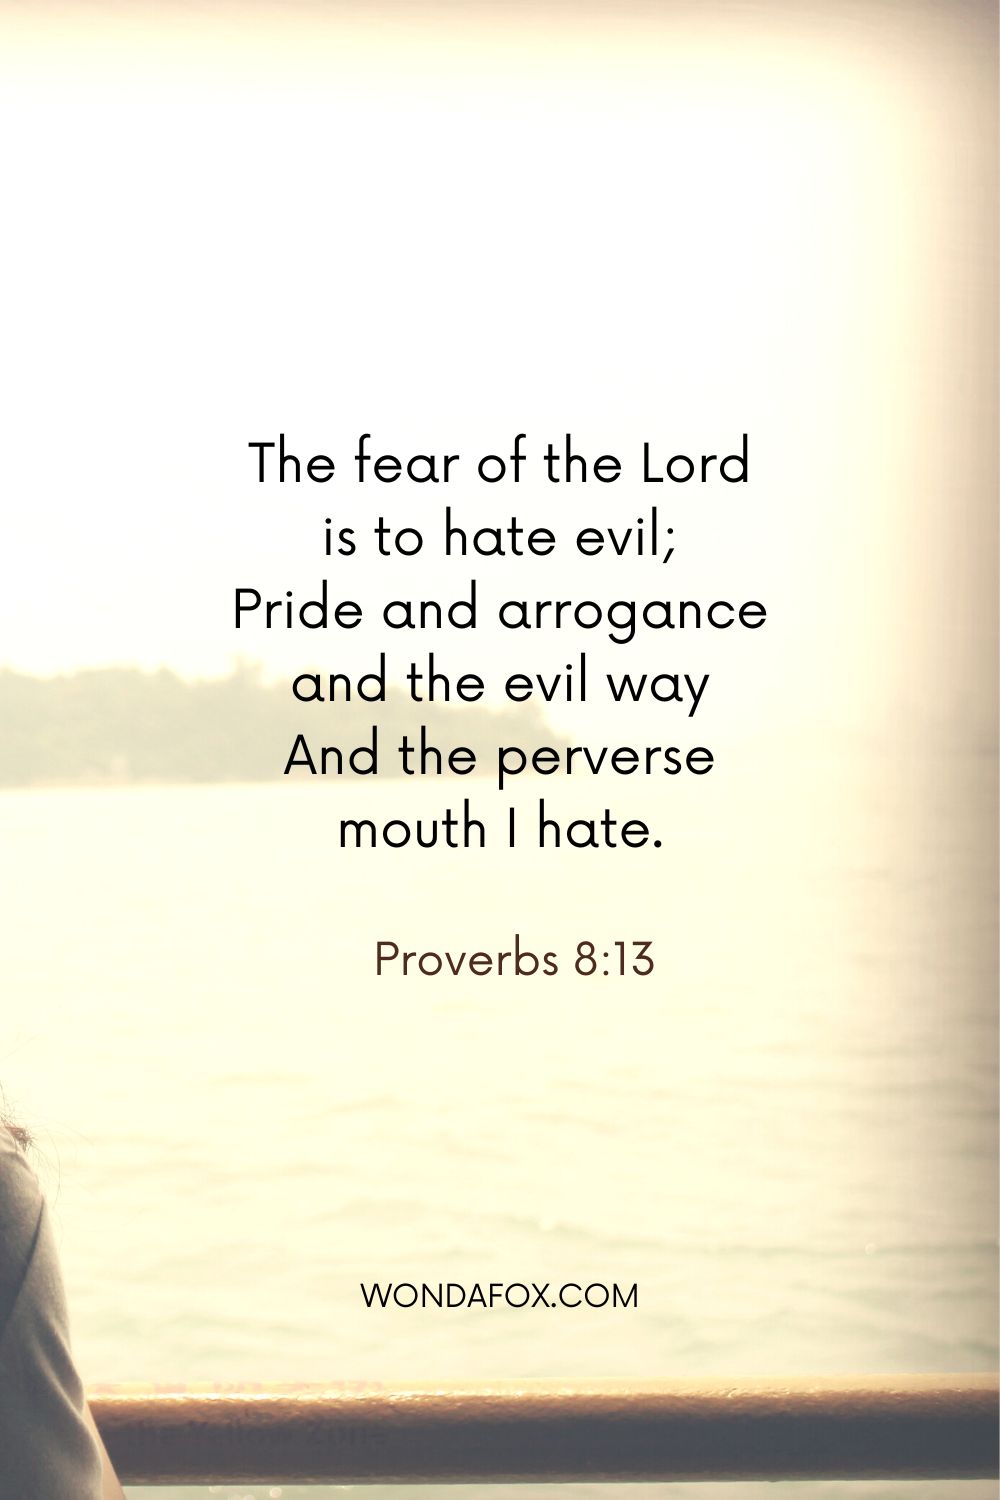 The fear of the Lord is to hate evil; Pride and arrogance and the evil way And the perverse mouth I hate.